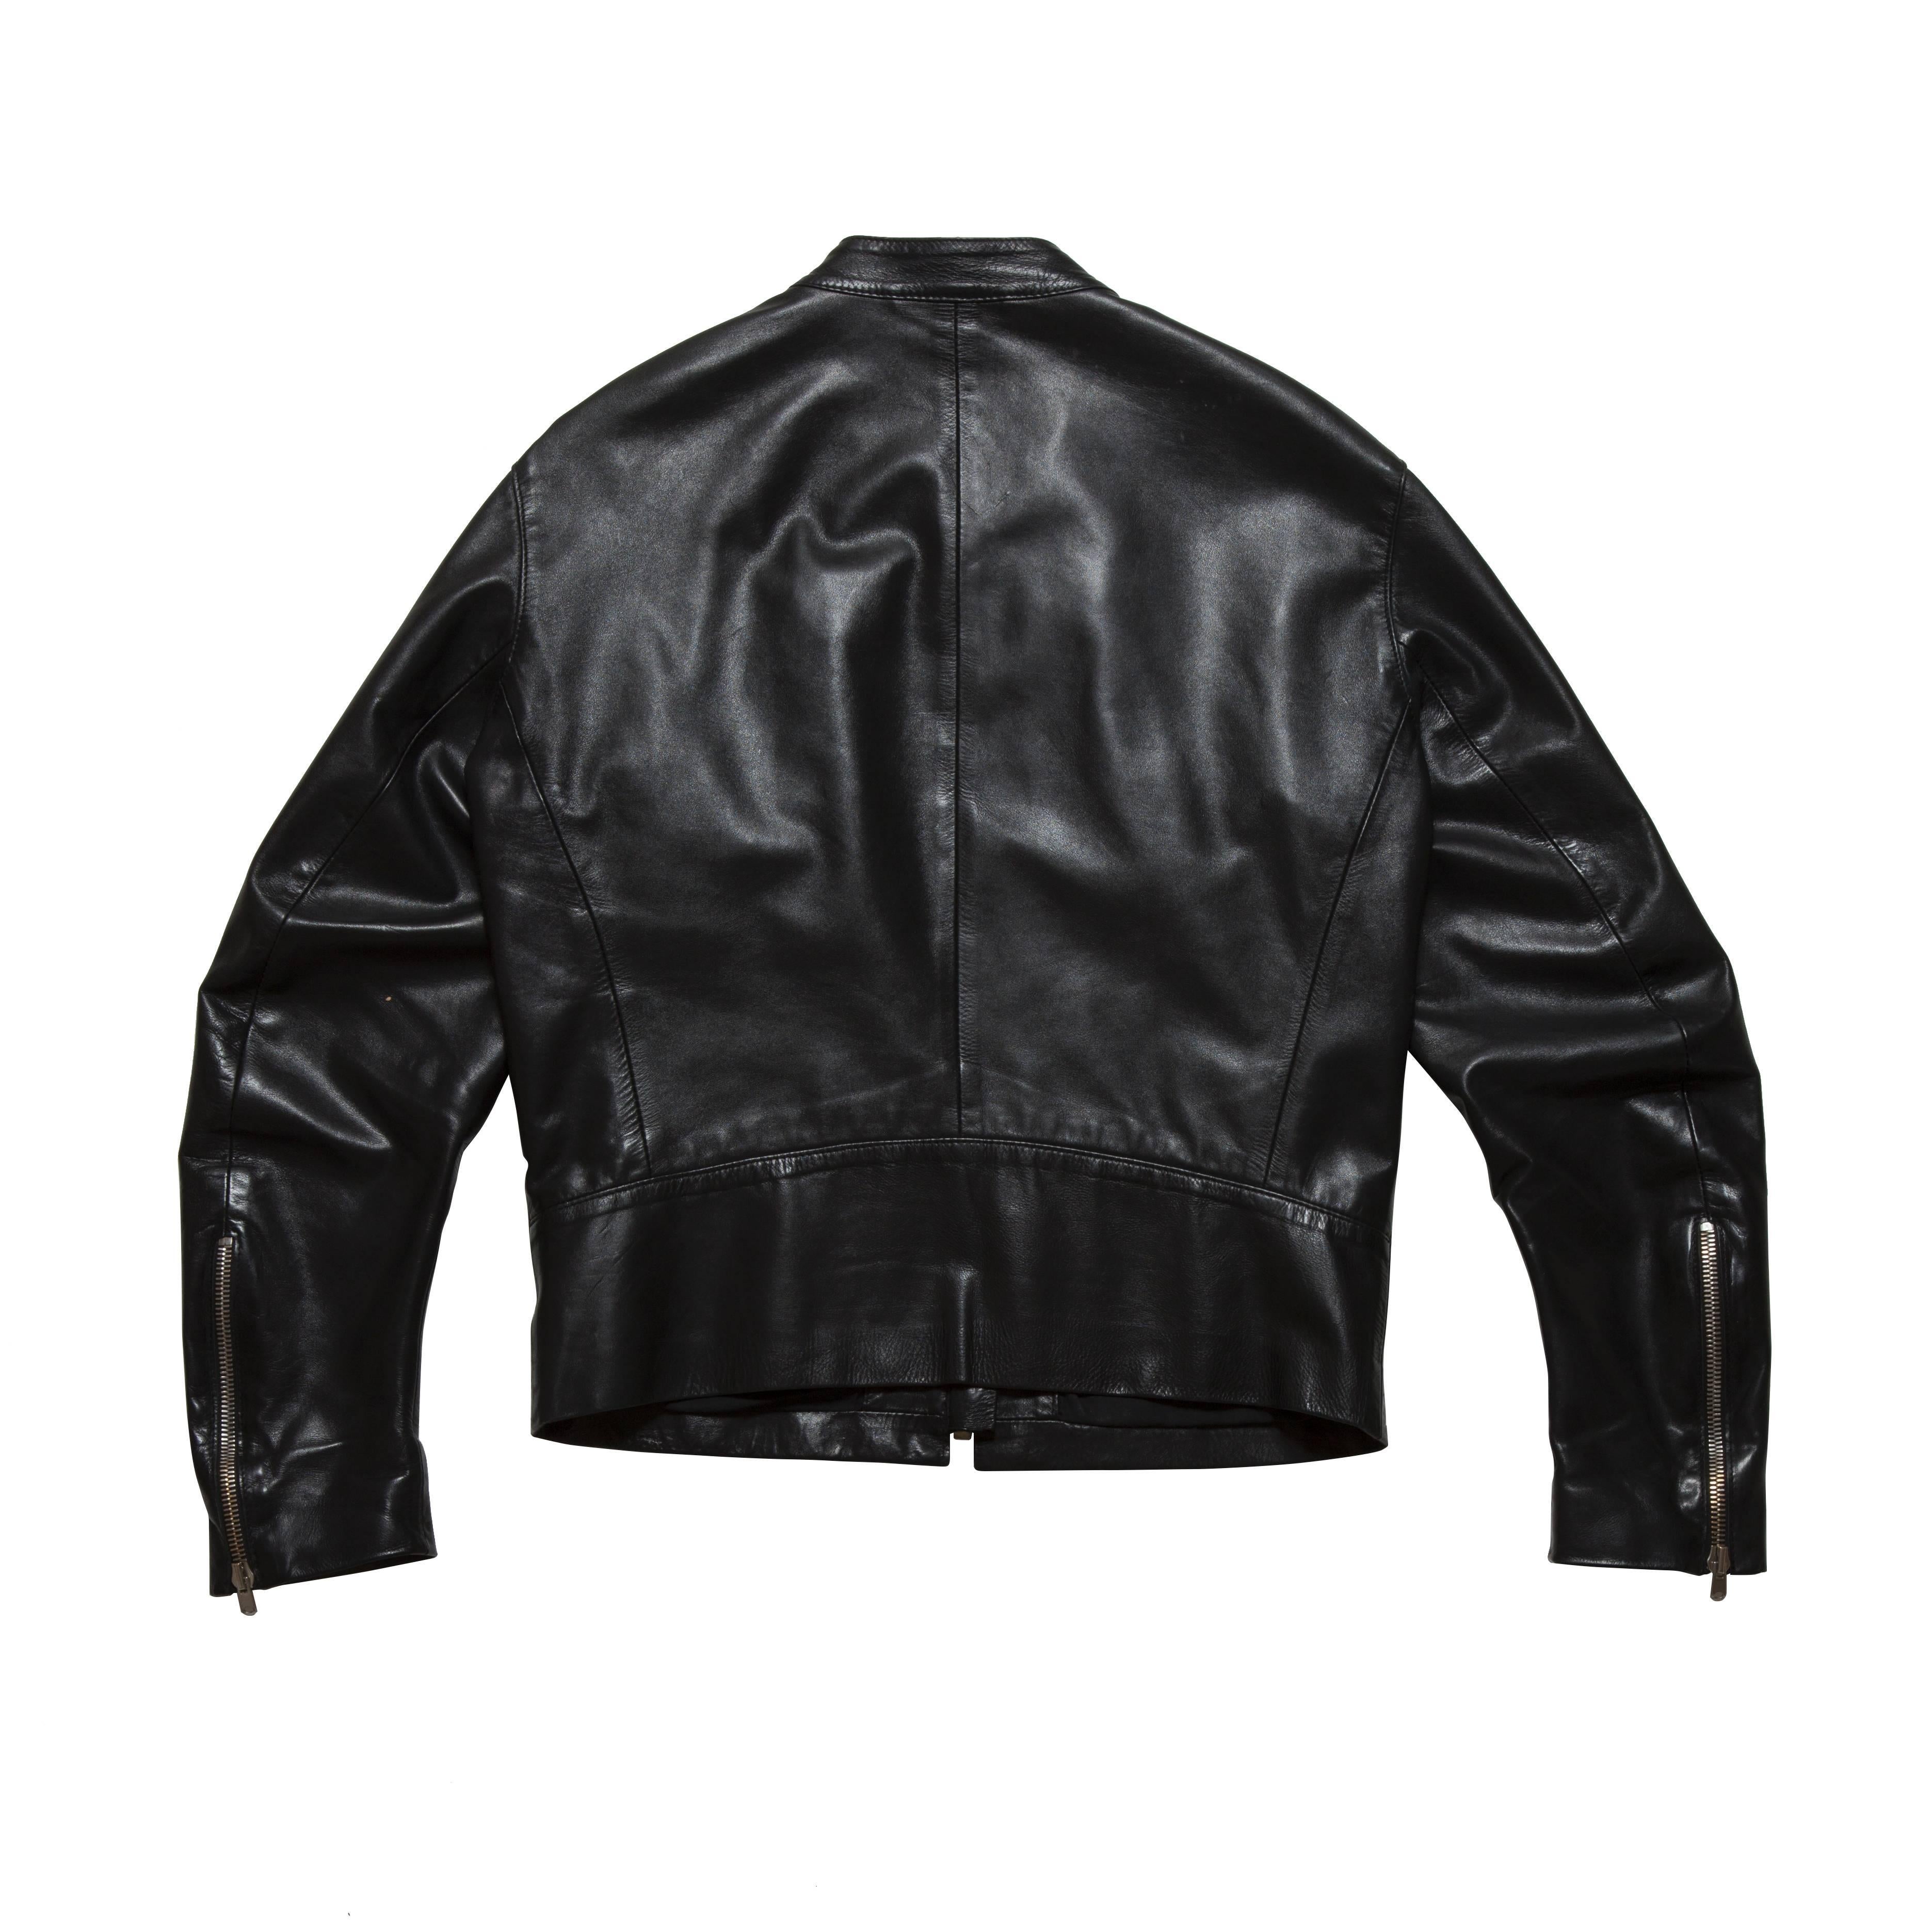 Maison Martin Margiela iconic five zip leather jacket line 14. Stand-up collar with snap closures, gunmetal zippers.
Original Size : 50
Made in Italy 

Measurements :
Shoulders 48 cm
Chest 48 cm
Sleeve 62 cm
Total length 65 cm
